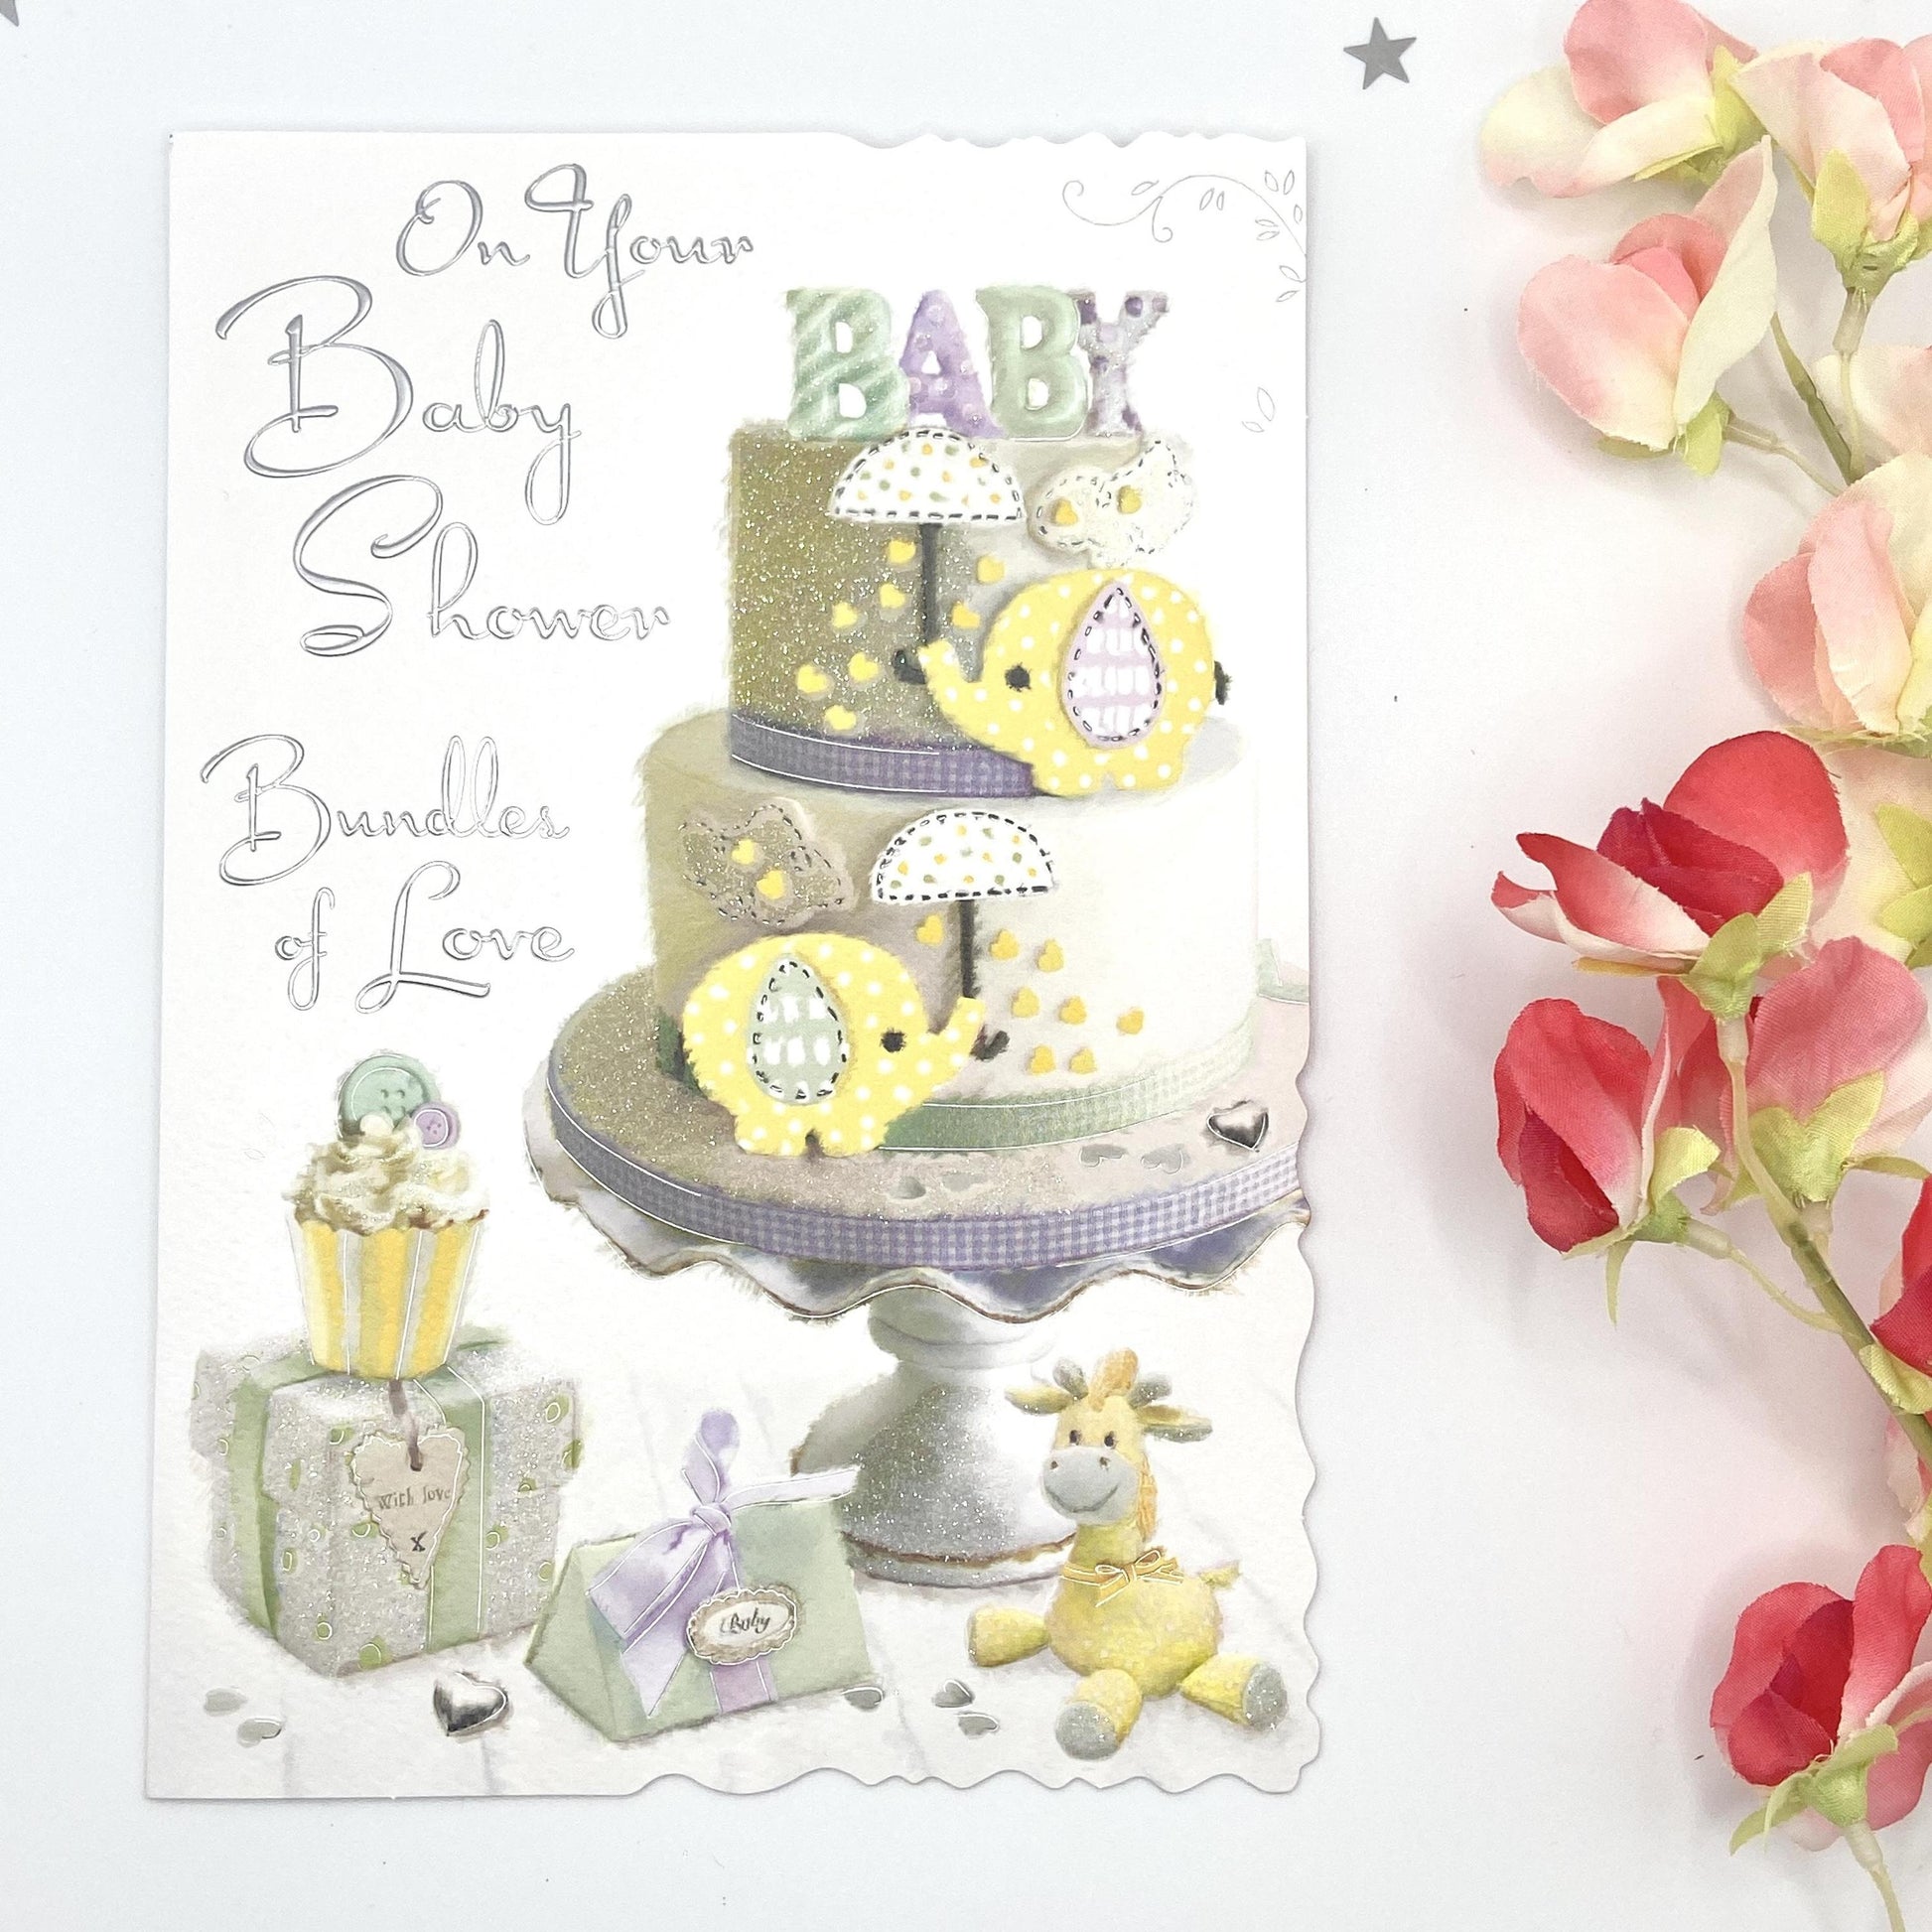 Velvet - On Your Baby Shower Card Front Image